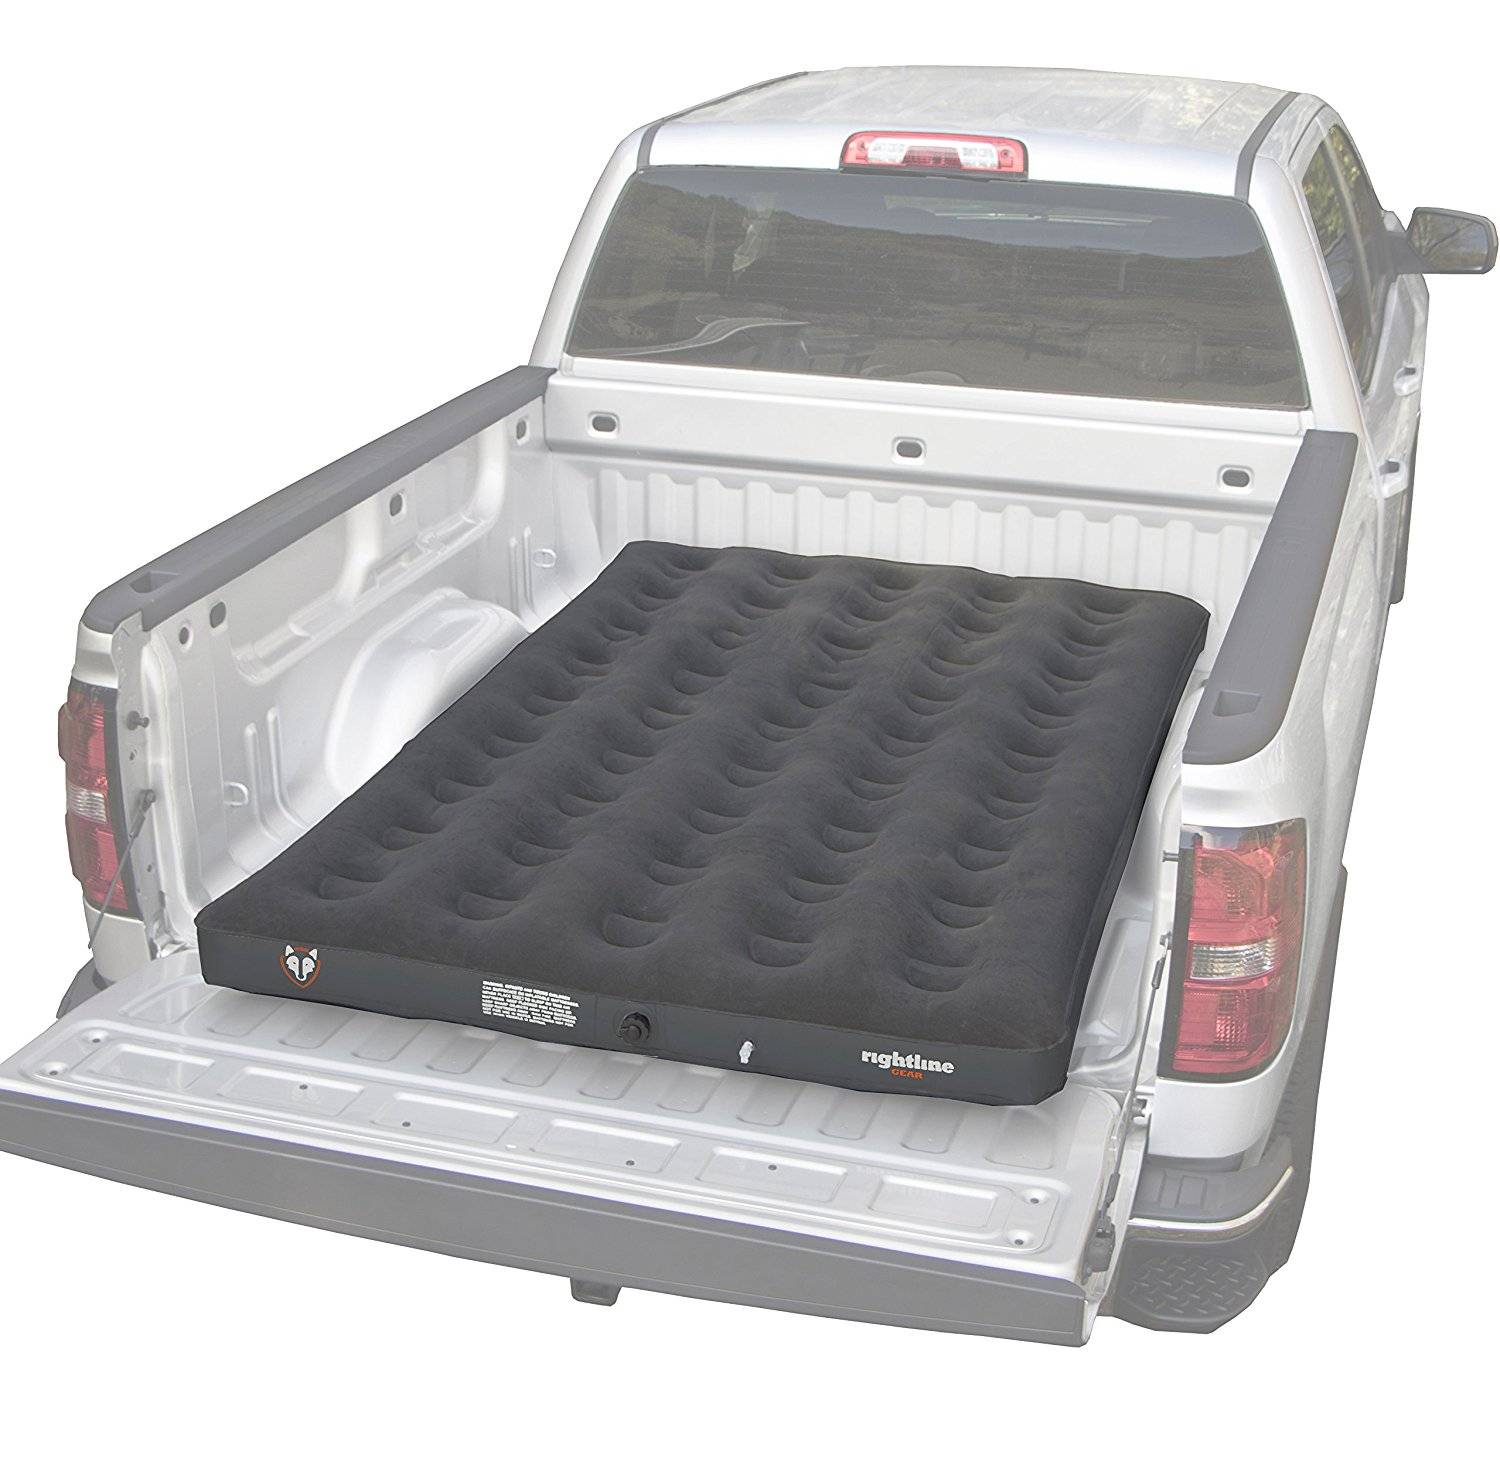 Rightline Gear Full Size Truck Bed Inflatable Air Mattress